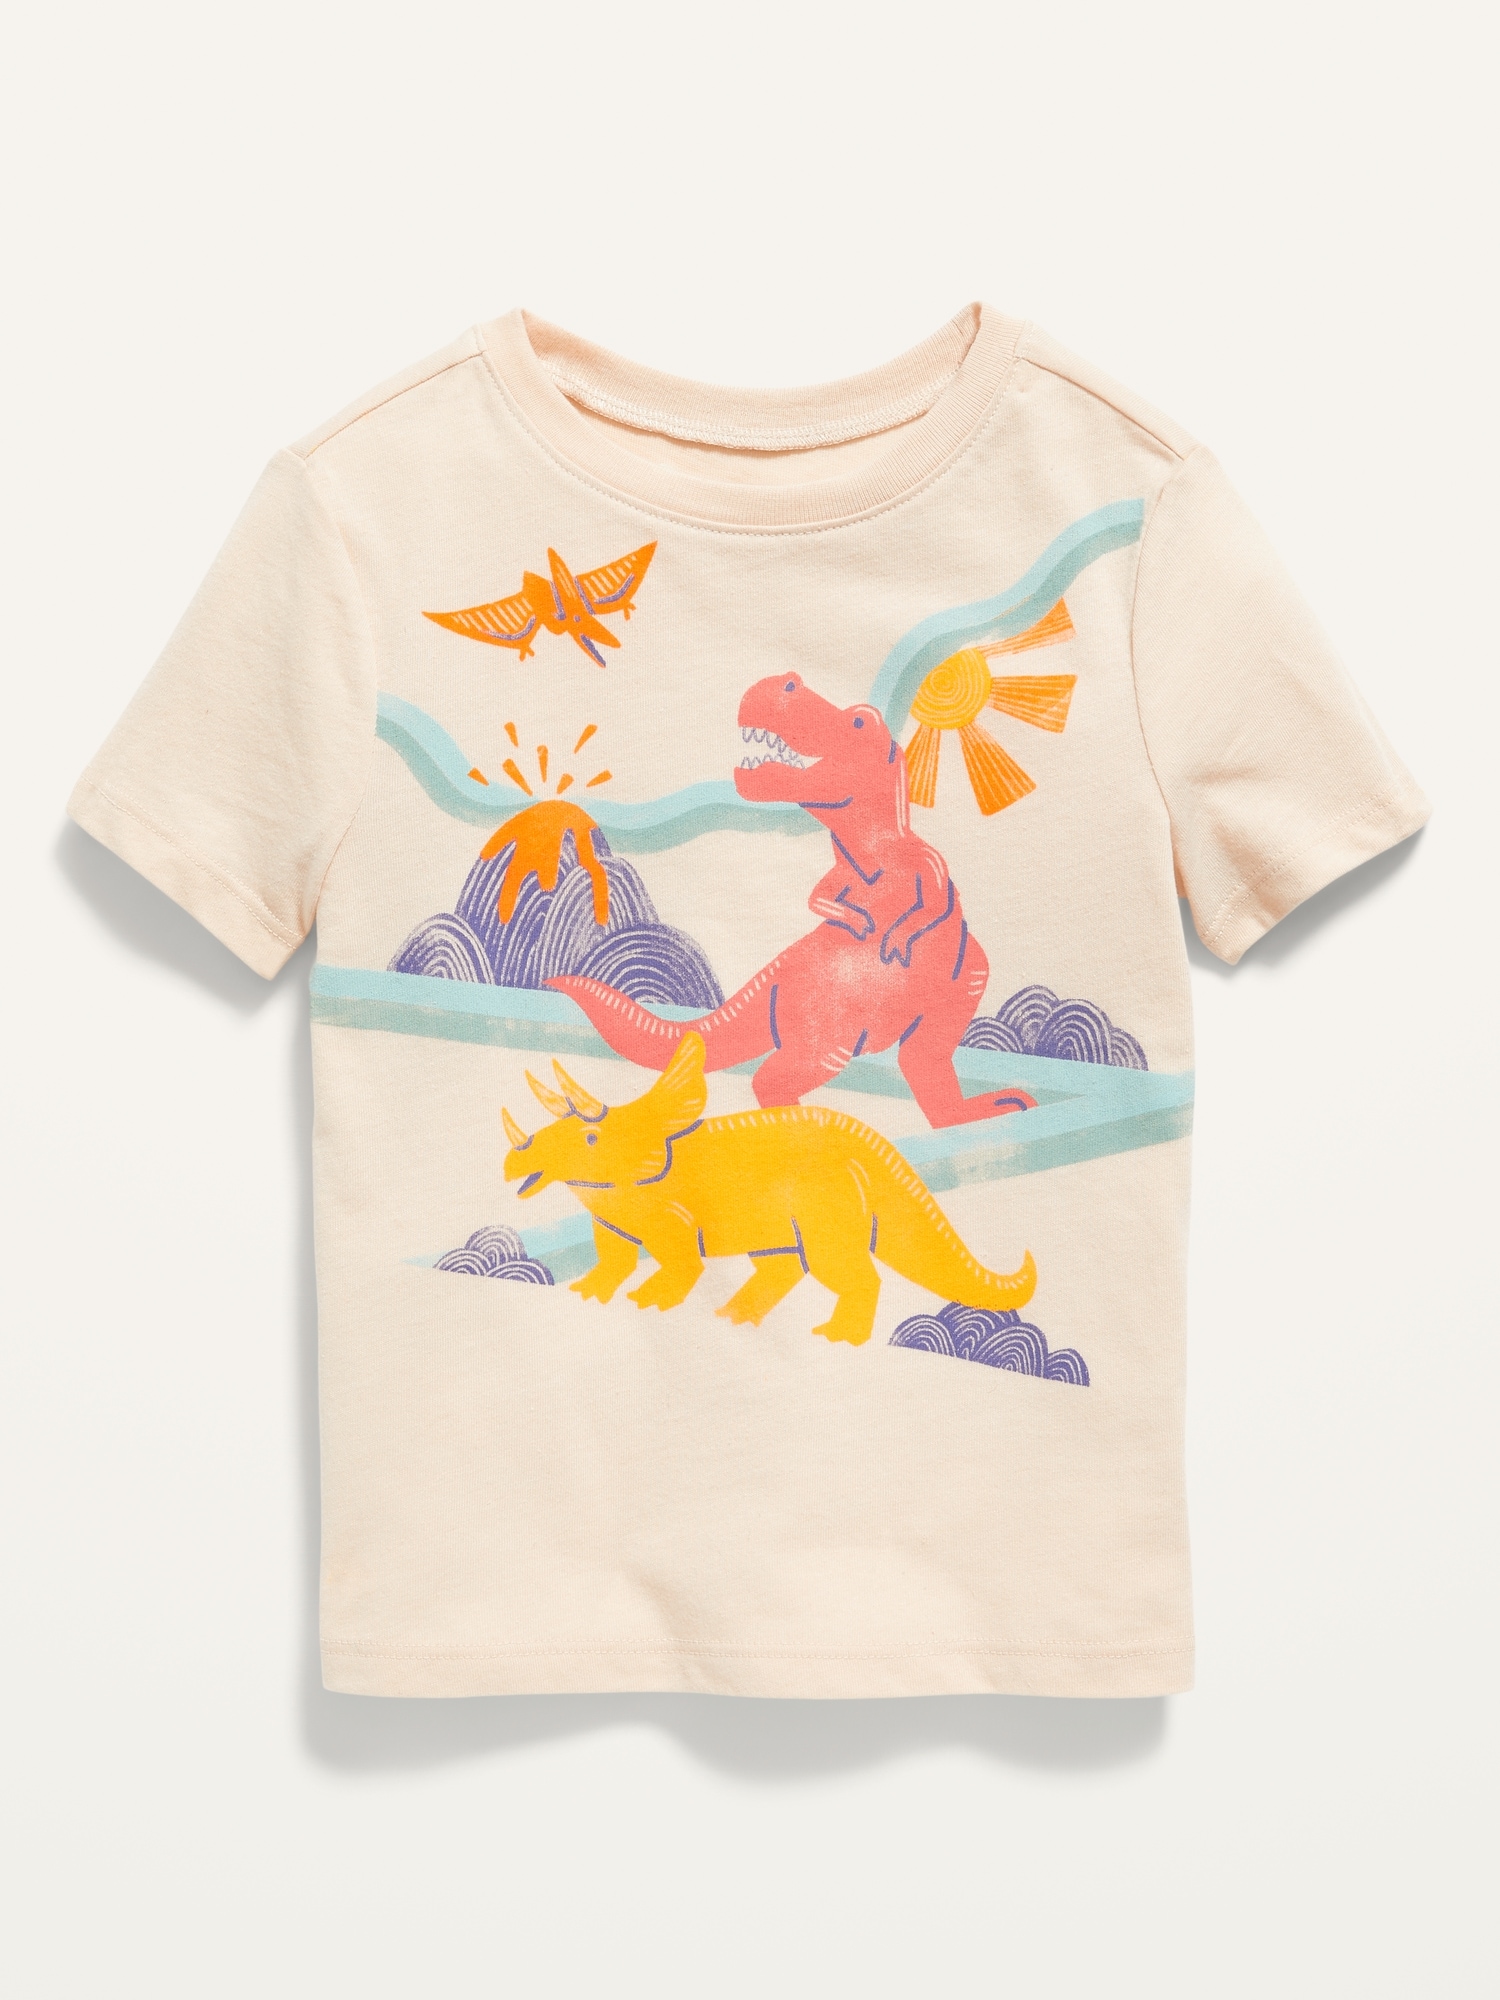 Unisex Dinosaurs-Graphic T-Shirt for Toddler | Old Navy